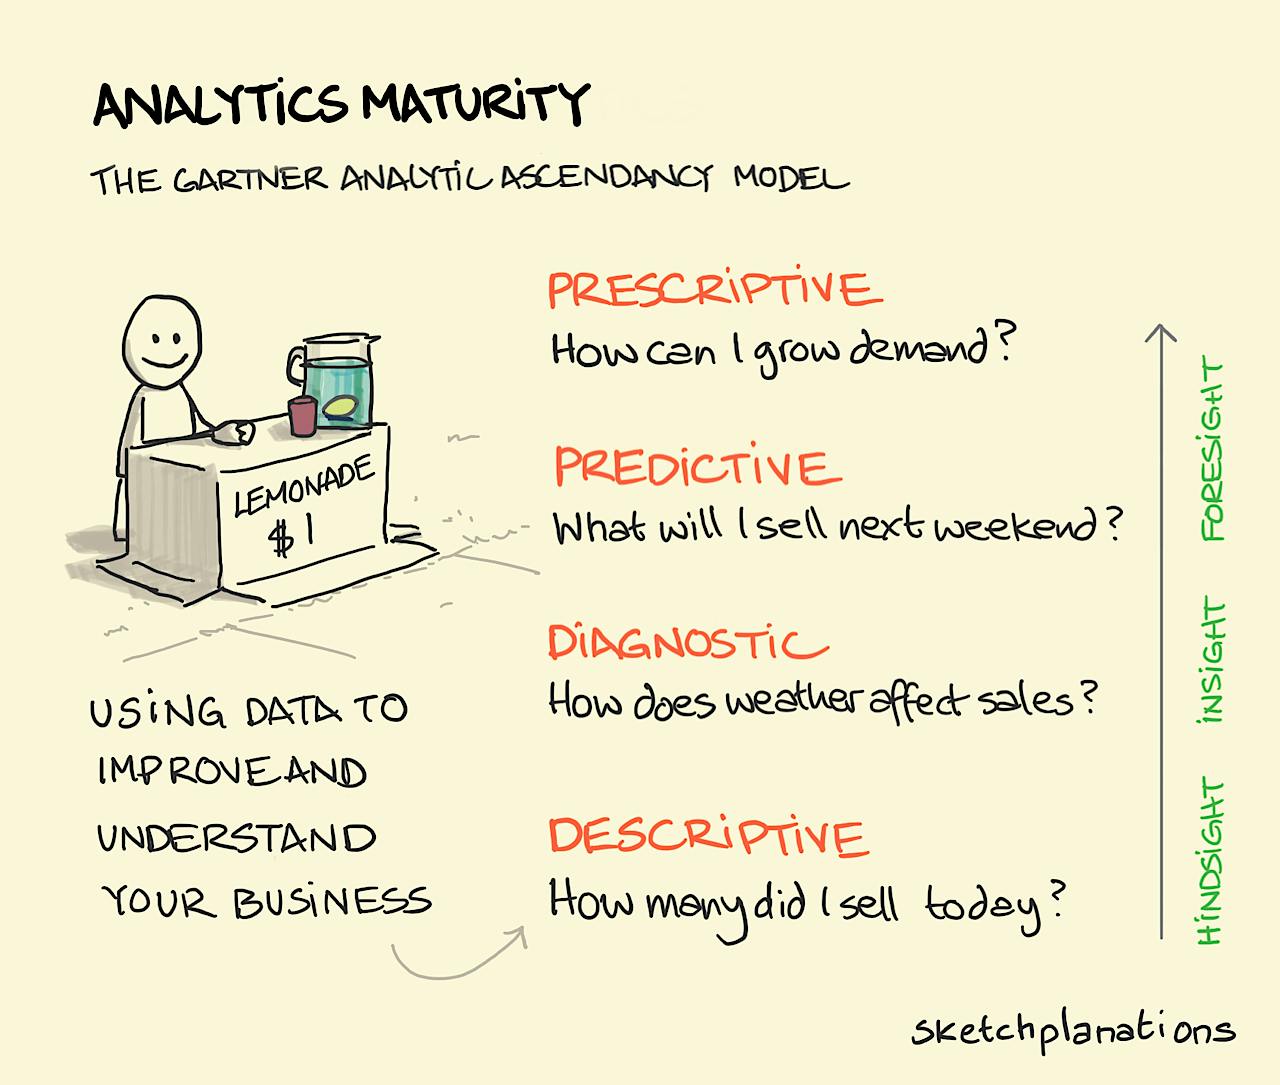 Analytics Maturity illustration: A young character is very happy, sat at their makeshift lemonade stand next to the sidewalk. When they close their stand, our young entrepreneur can assess their performance today using hindsight and insight to inform preparation through foresight for next weekend. 